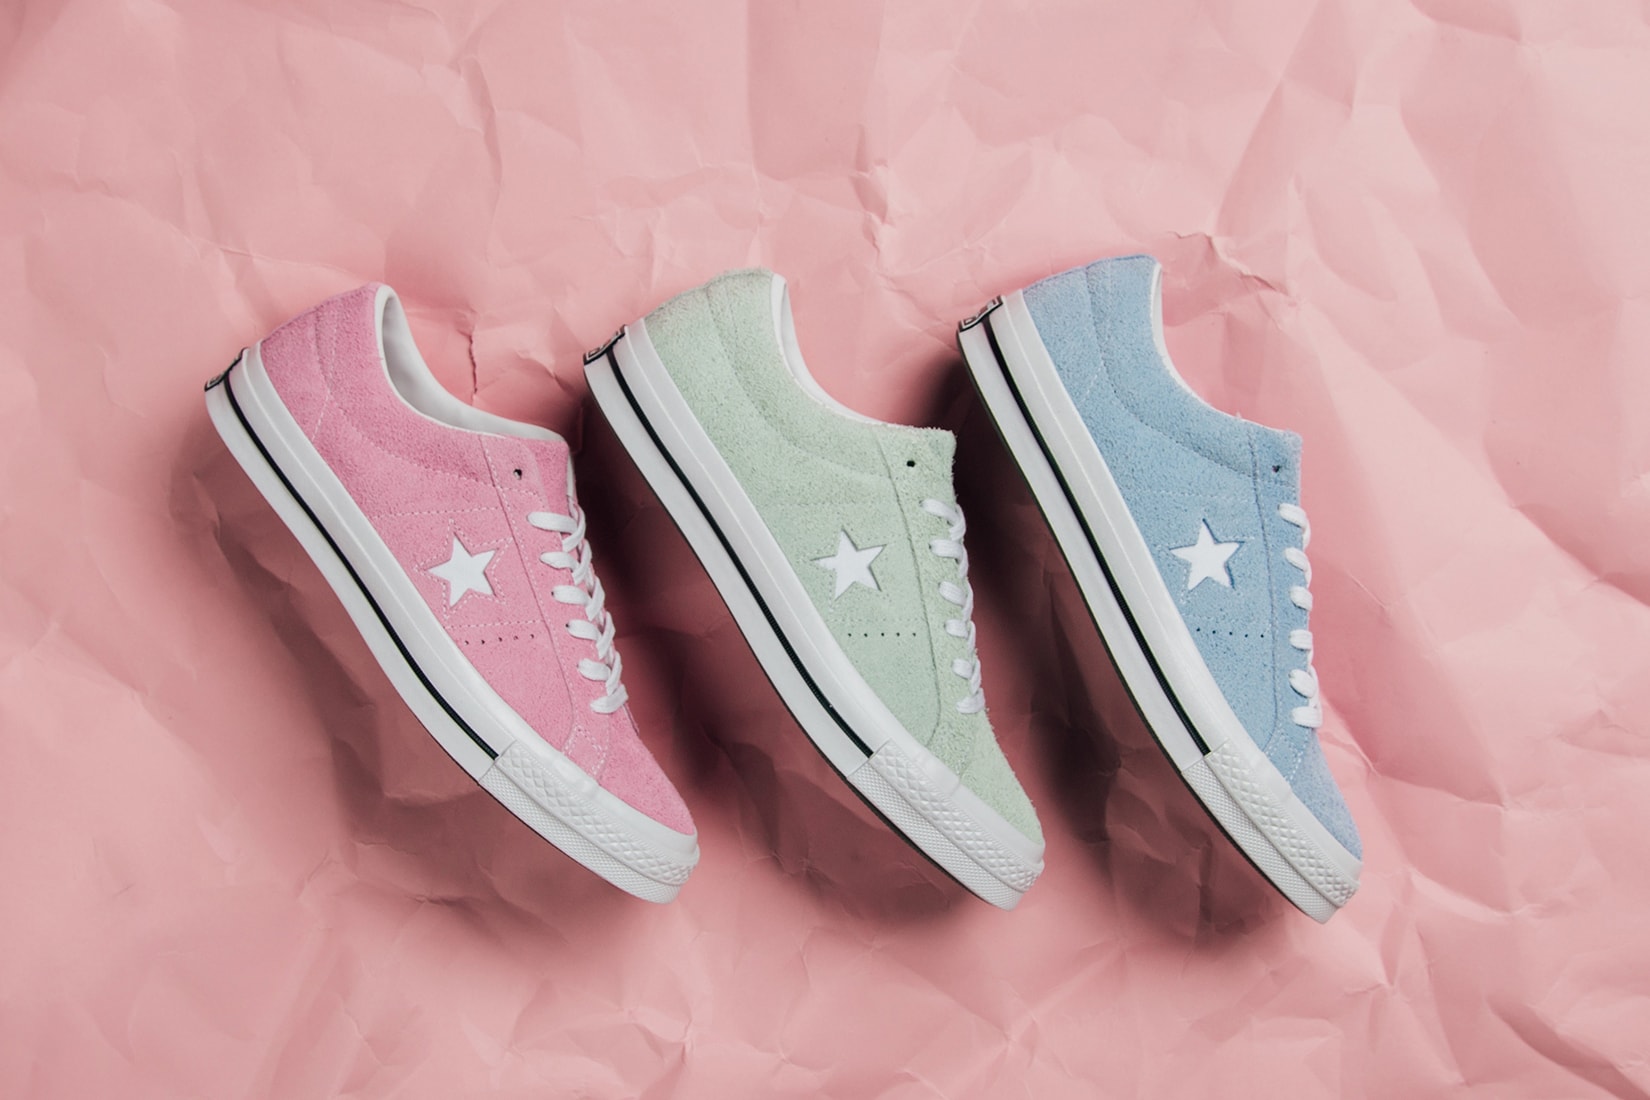 Converse One Star "Cotton Candy" Pack Pastel Color Pink Mint Blue